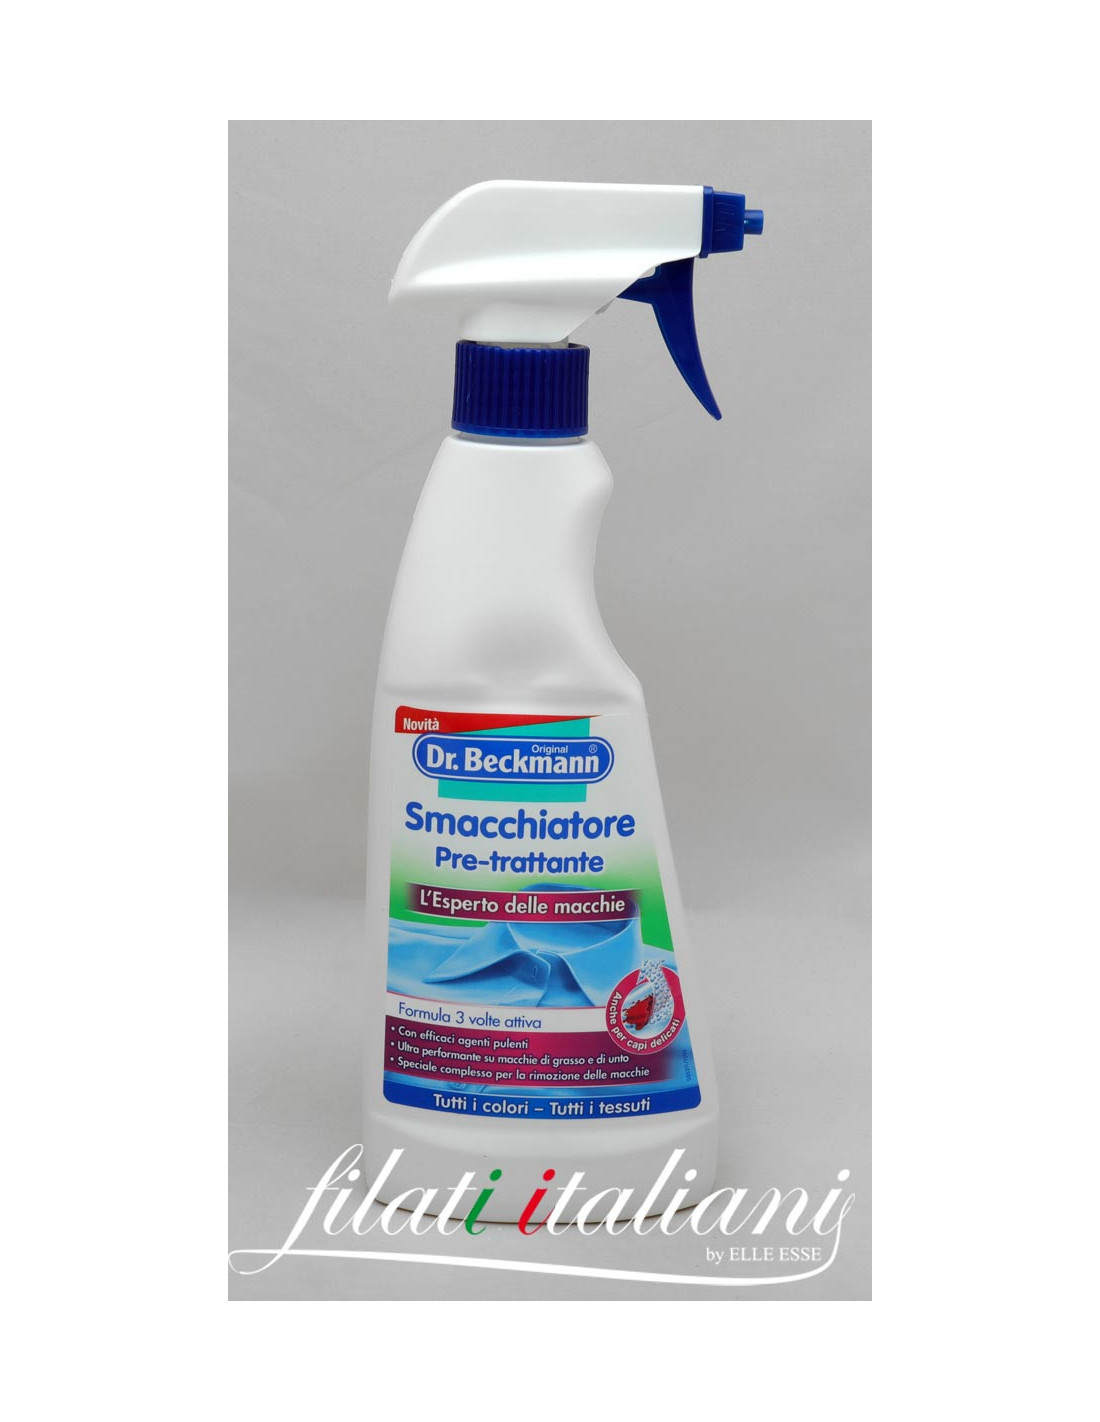 https://www.filatiitaliani.it/7596-thickbox_default/drbeckmann-pre-wash-stain-devils-500ml-it-works-removing-new-or-dried-in-stains-dr-beckmanns-pre-wash-stain-devil-stain-remover-.jpg